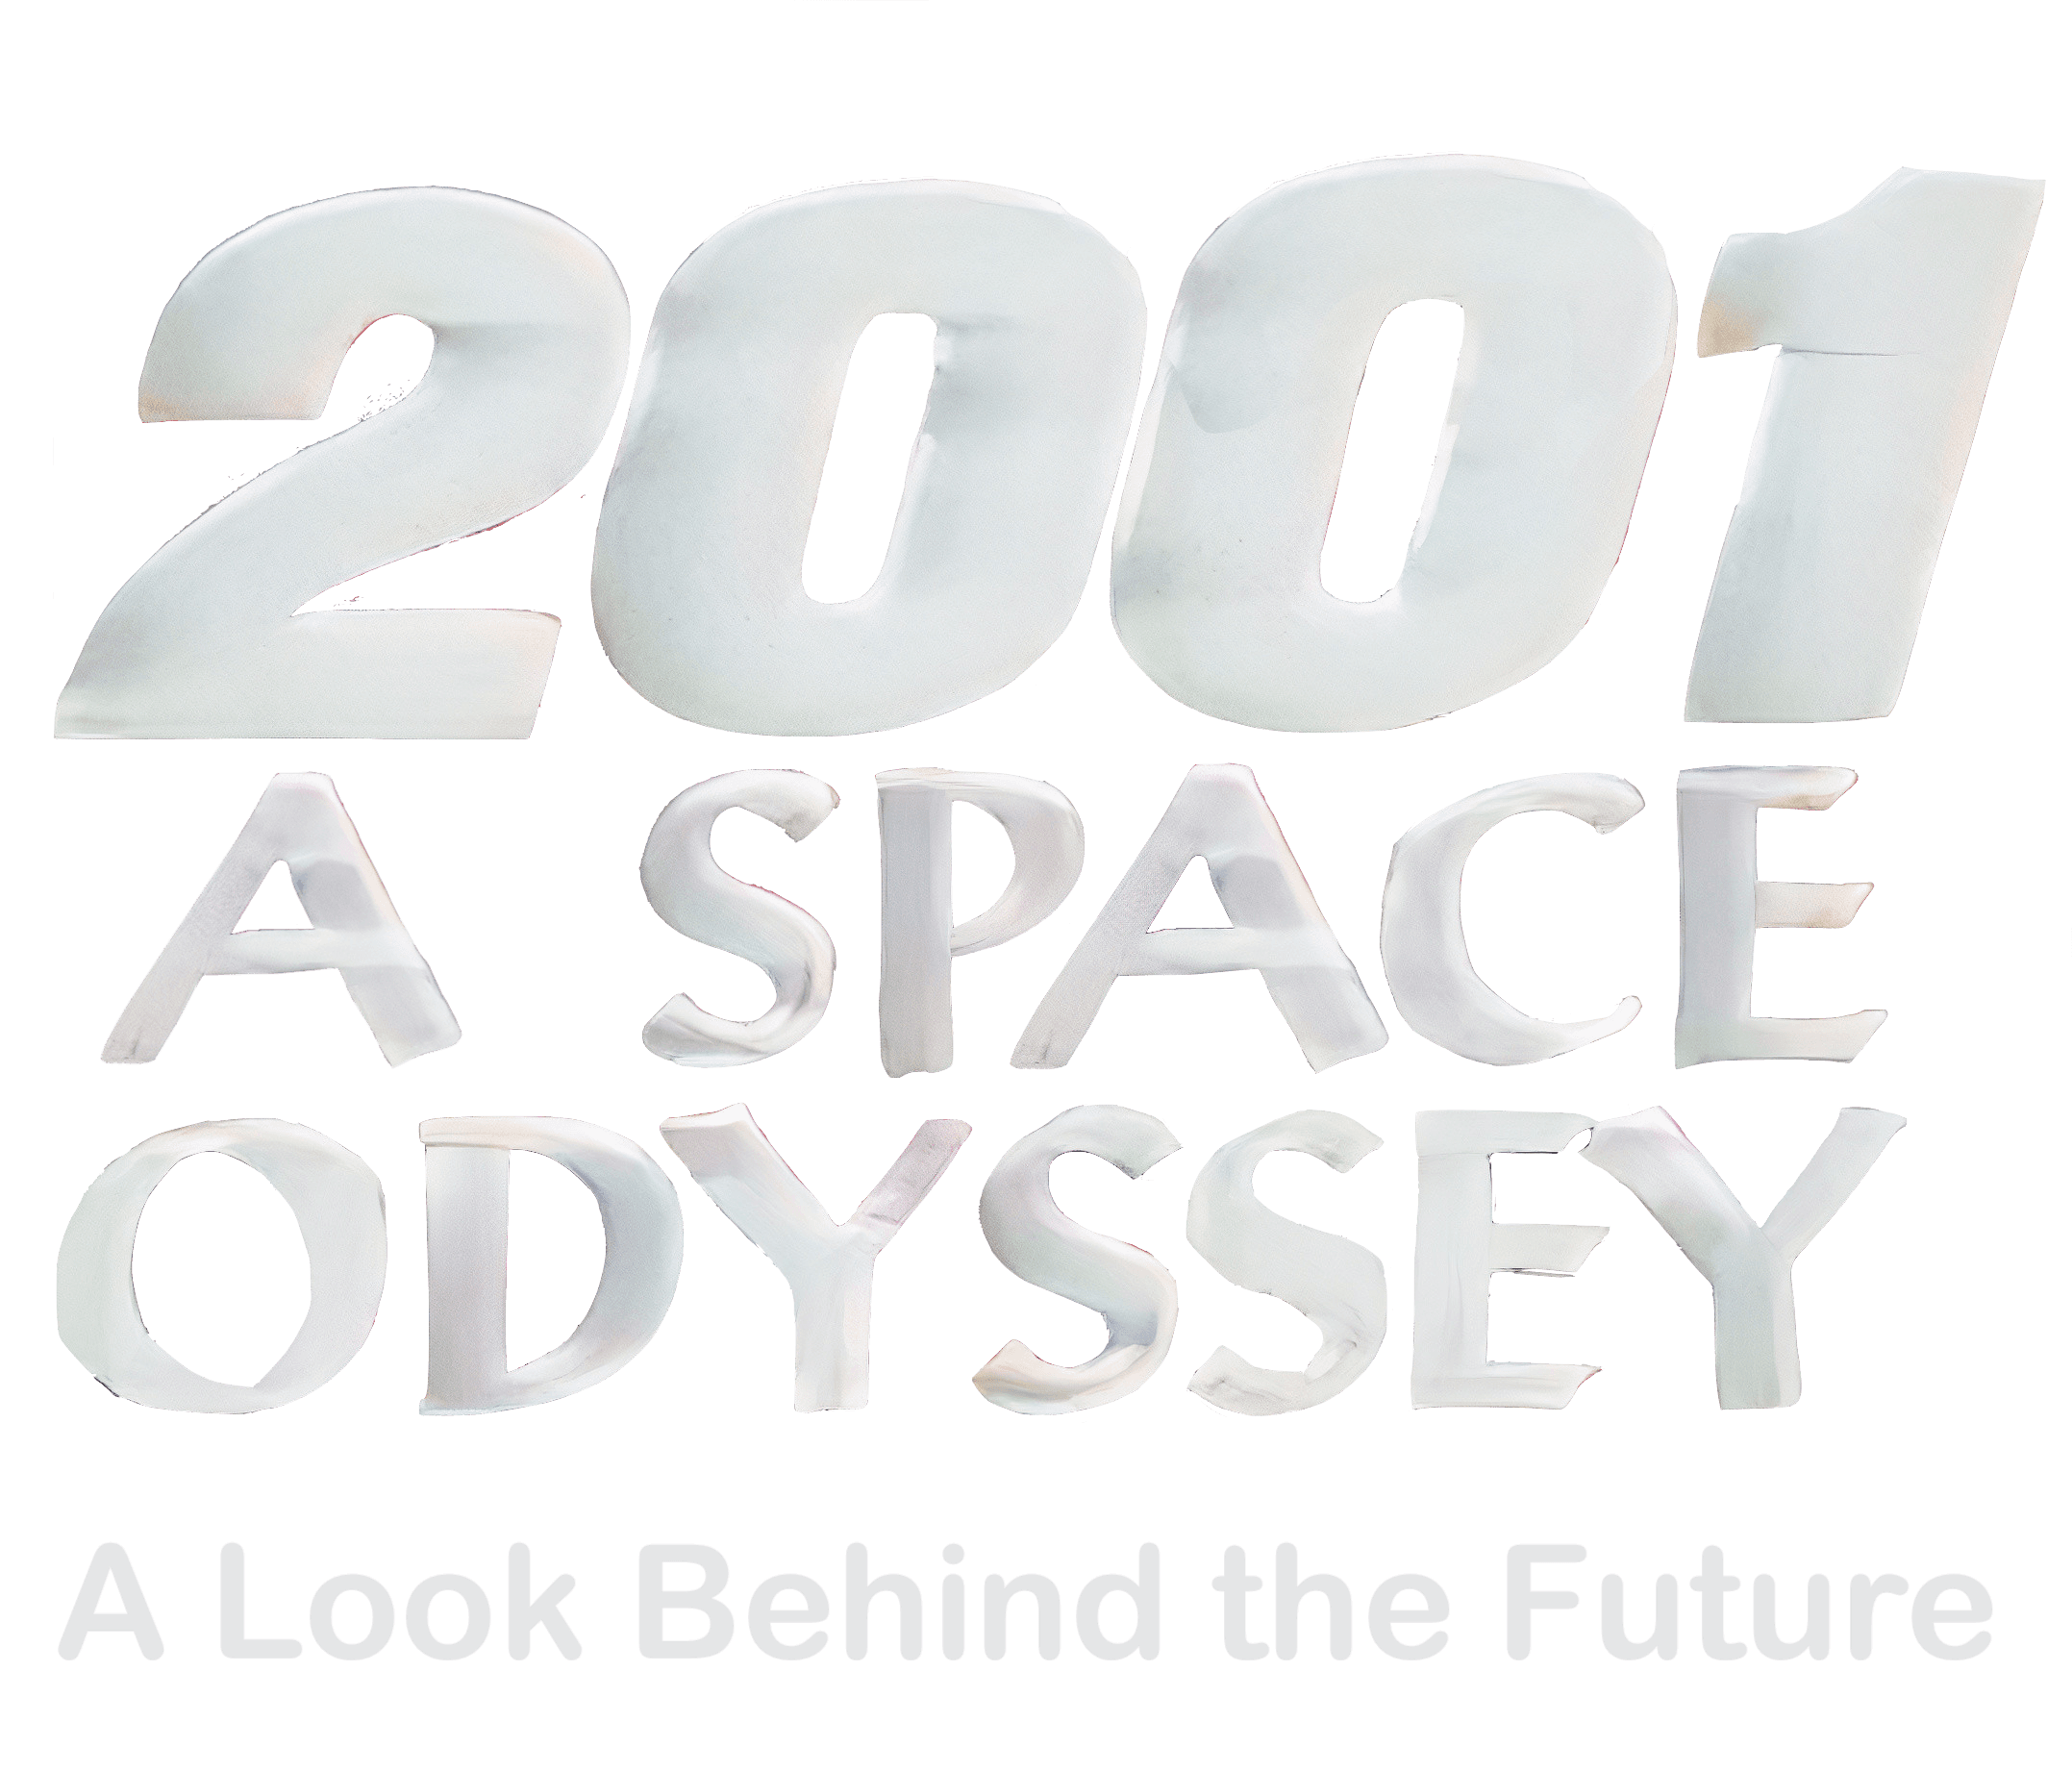 '2001: A Space Odyssey' – A Look Behind the Future logo